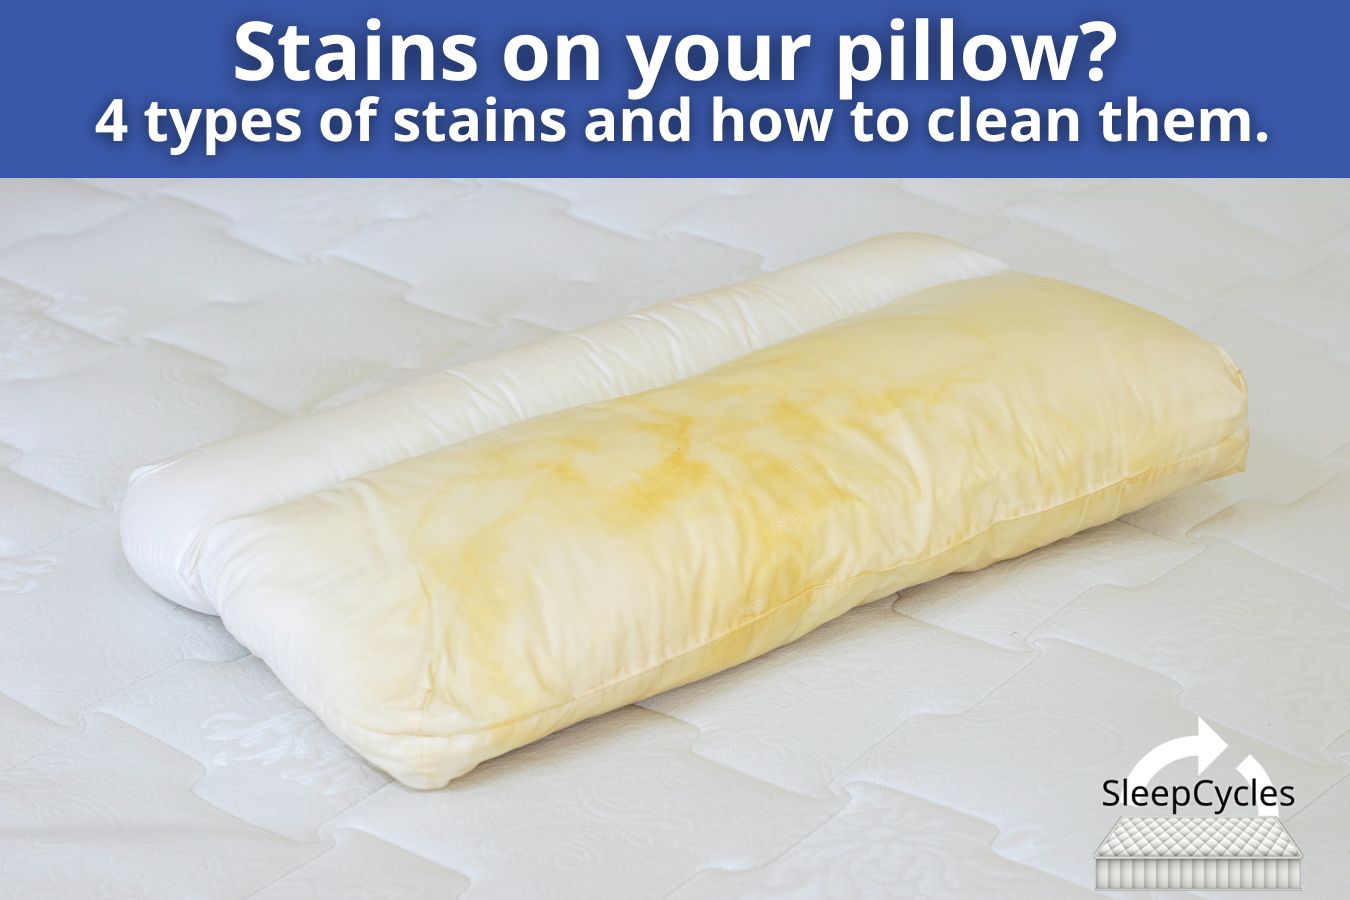 Stains on your pillow